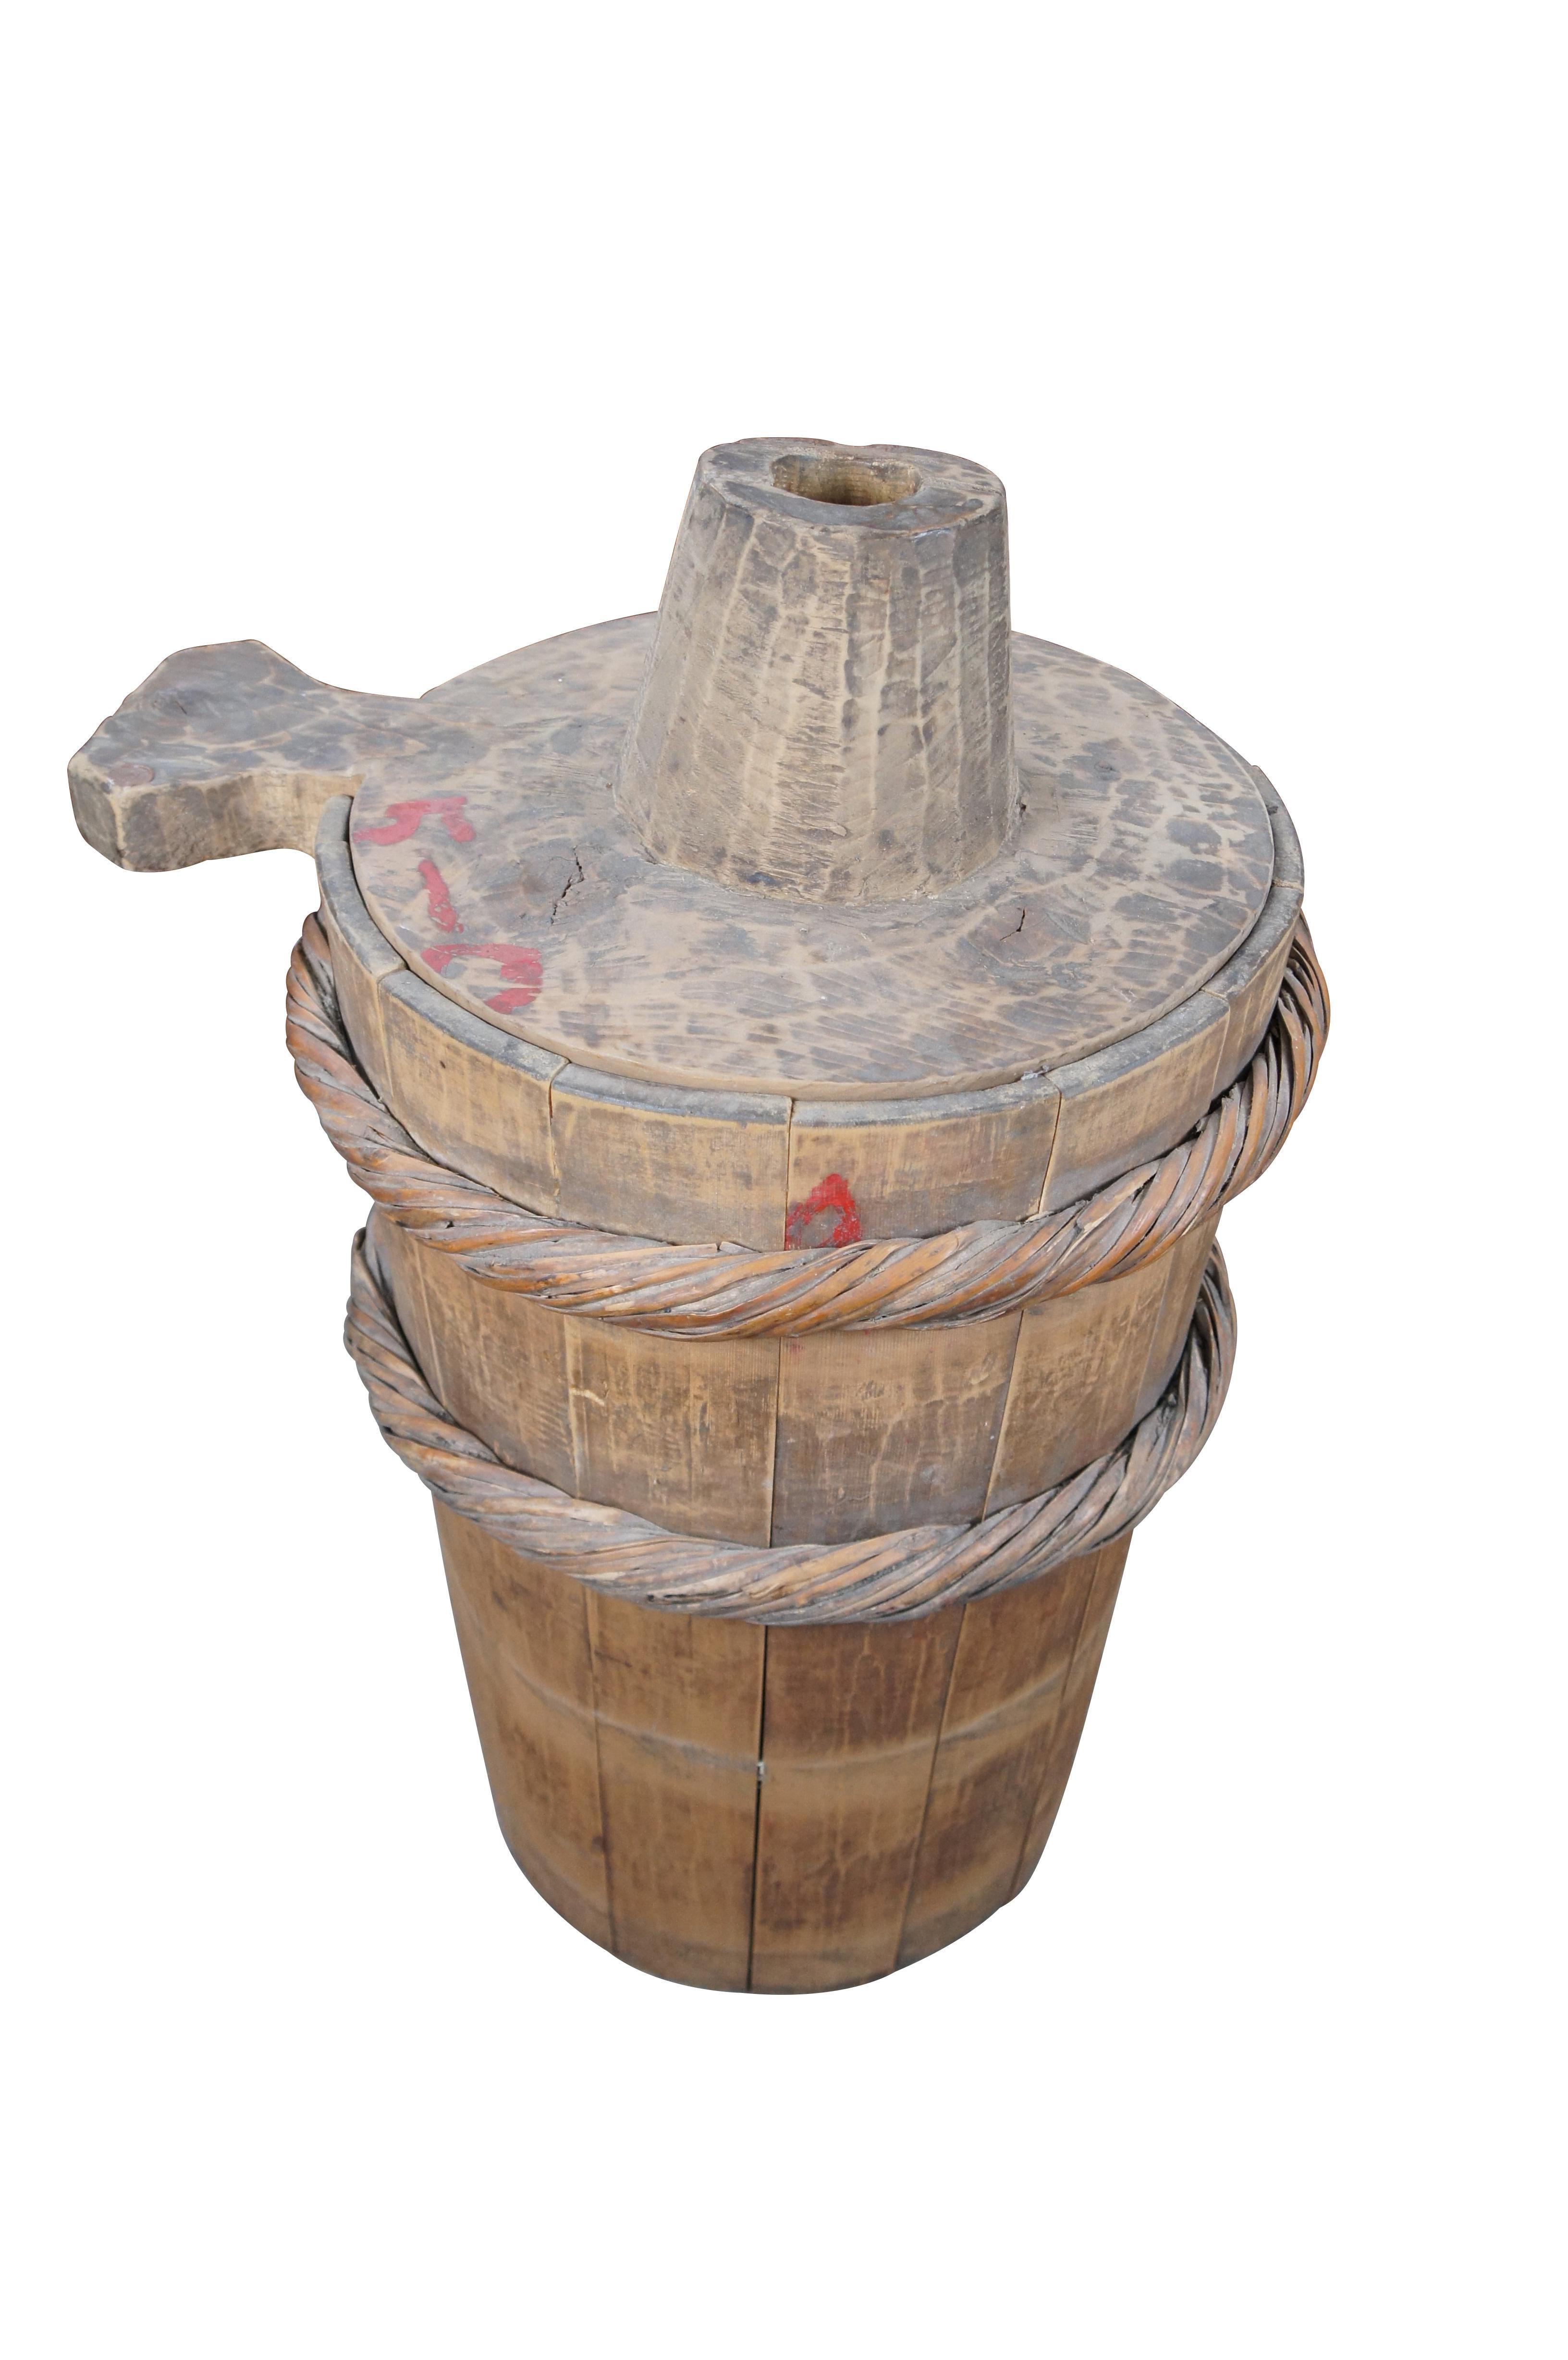 Primitive Antique Farmhouse Pine Butter Churn Milk Bucket Wood Barrel Cannister In Good Condition For Sale In Dayton, OH